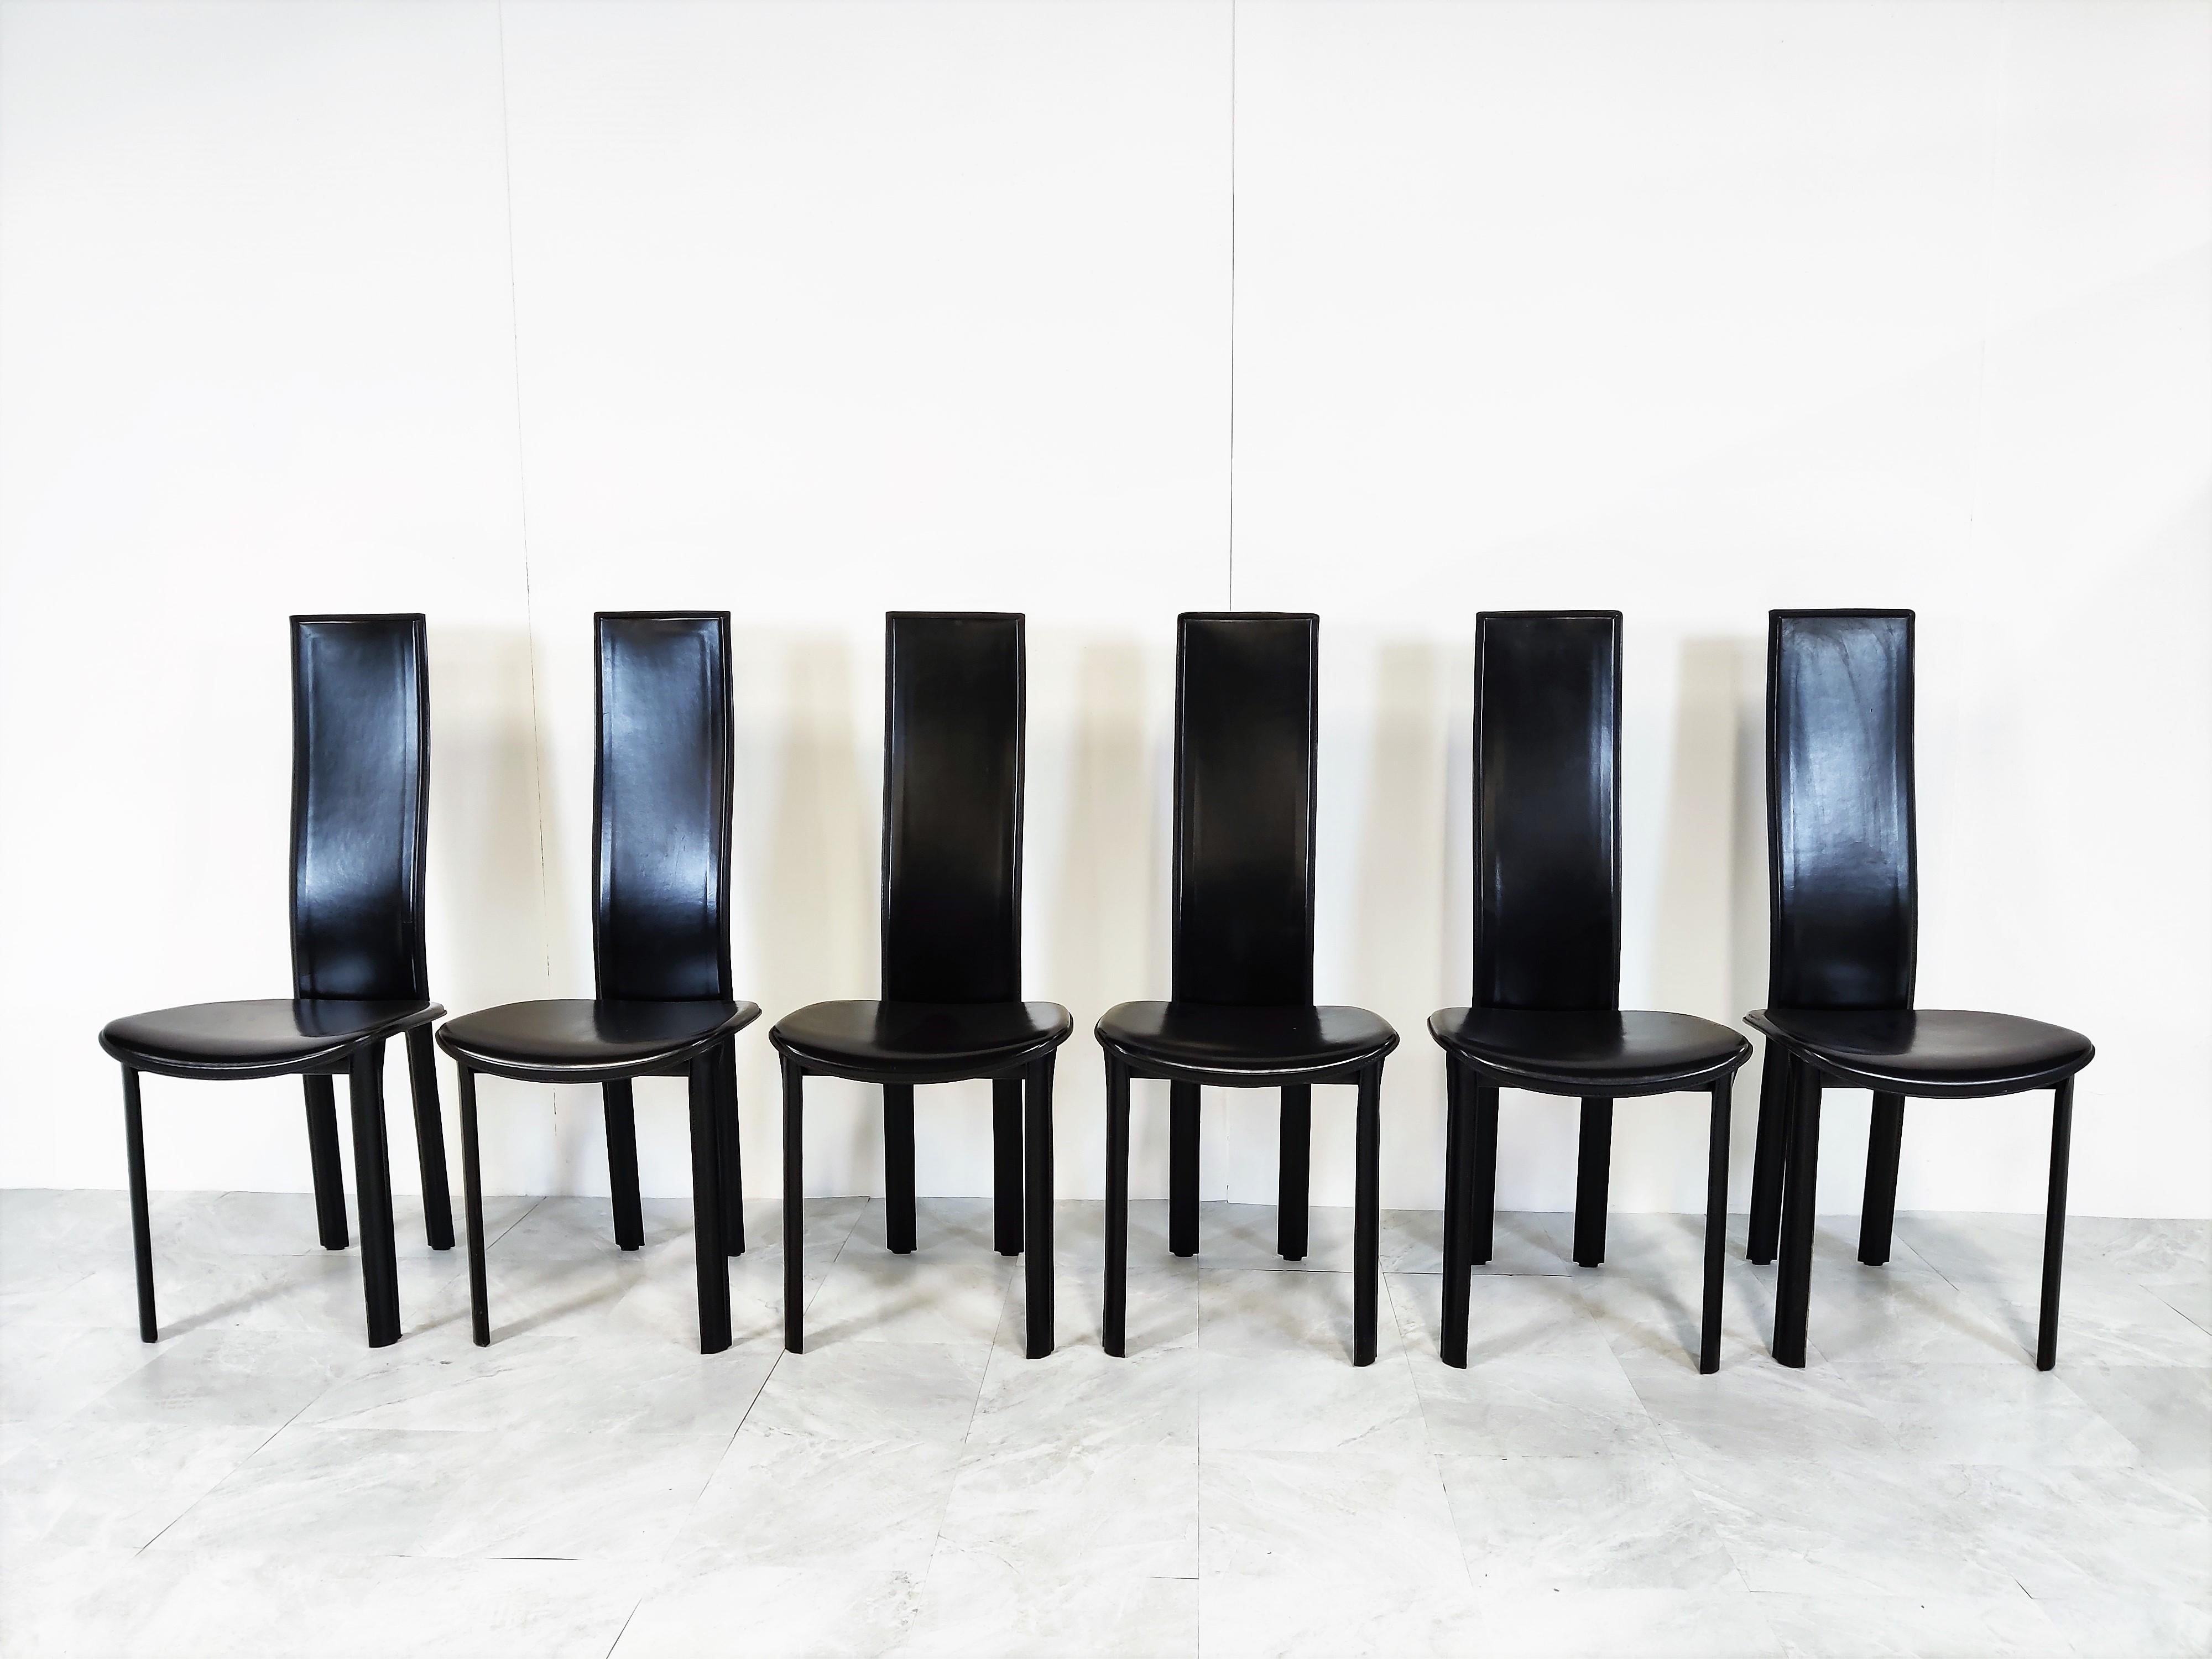 Vintage black leather high back dining chairs with stitched leather.

These high quality dining chairs have a timeless design and are made of strong leather.

1980s - Italy

Good condition

Dimensions:
Height: 102cm/40.15